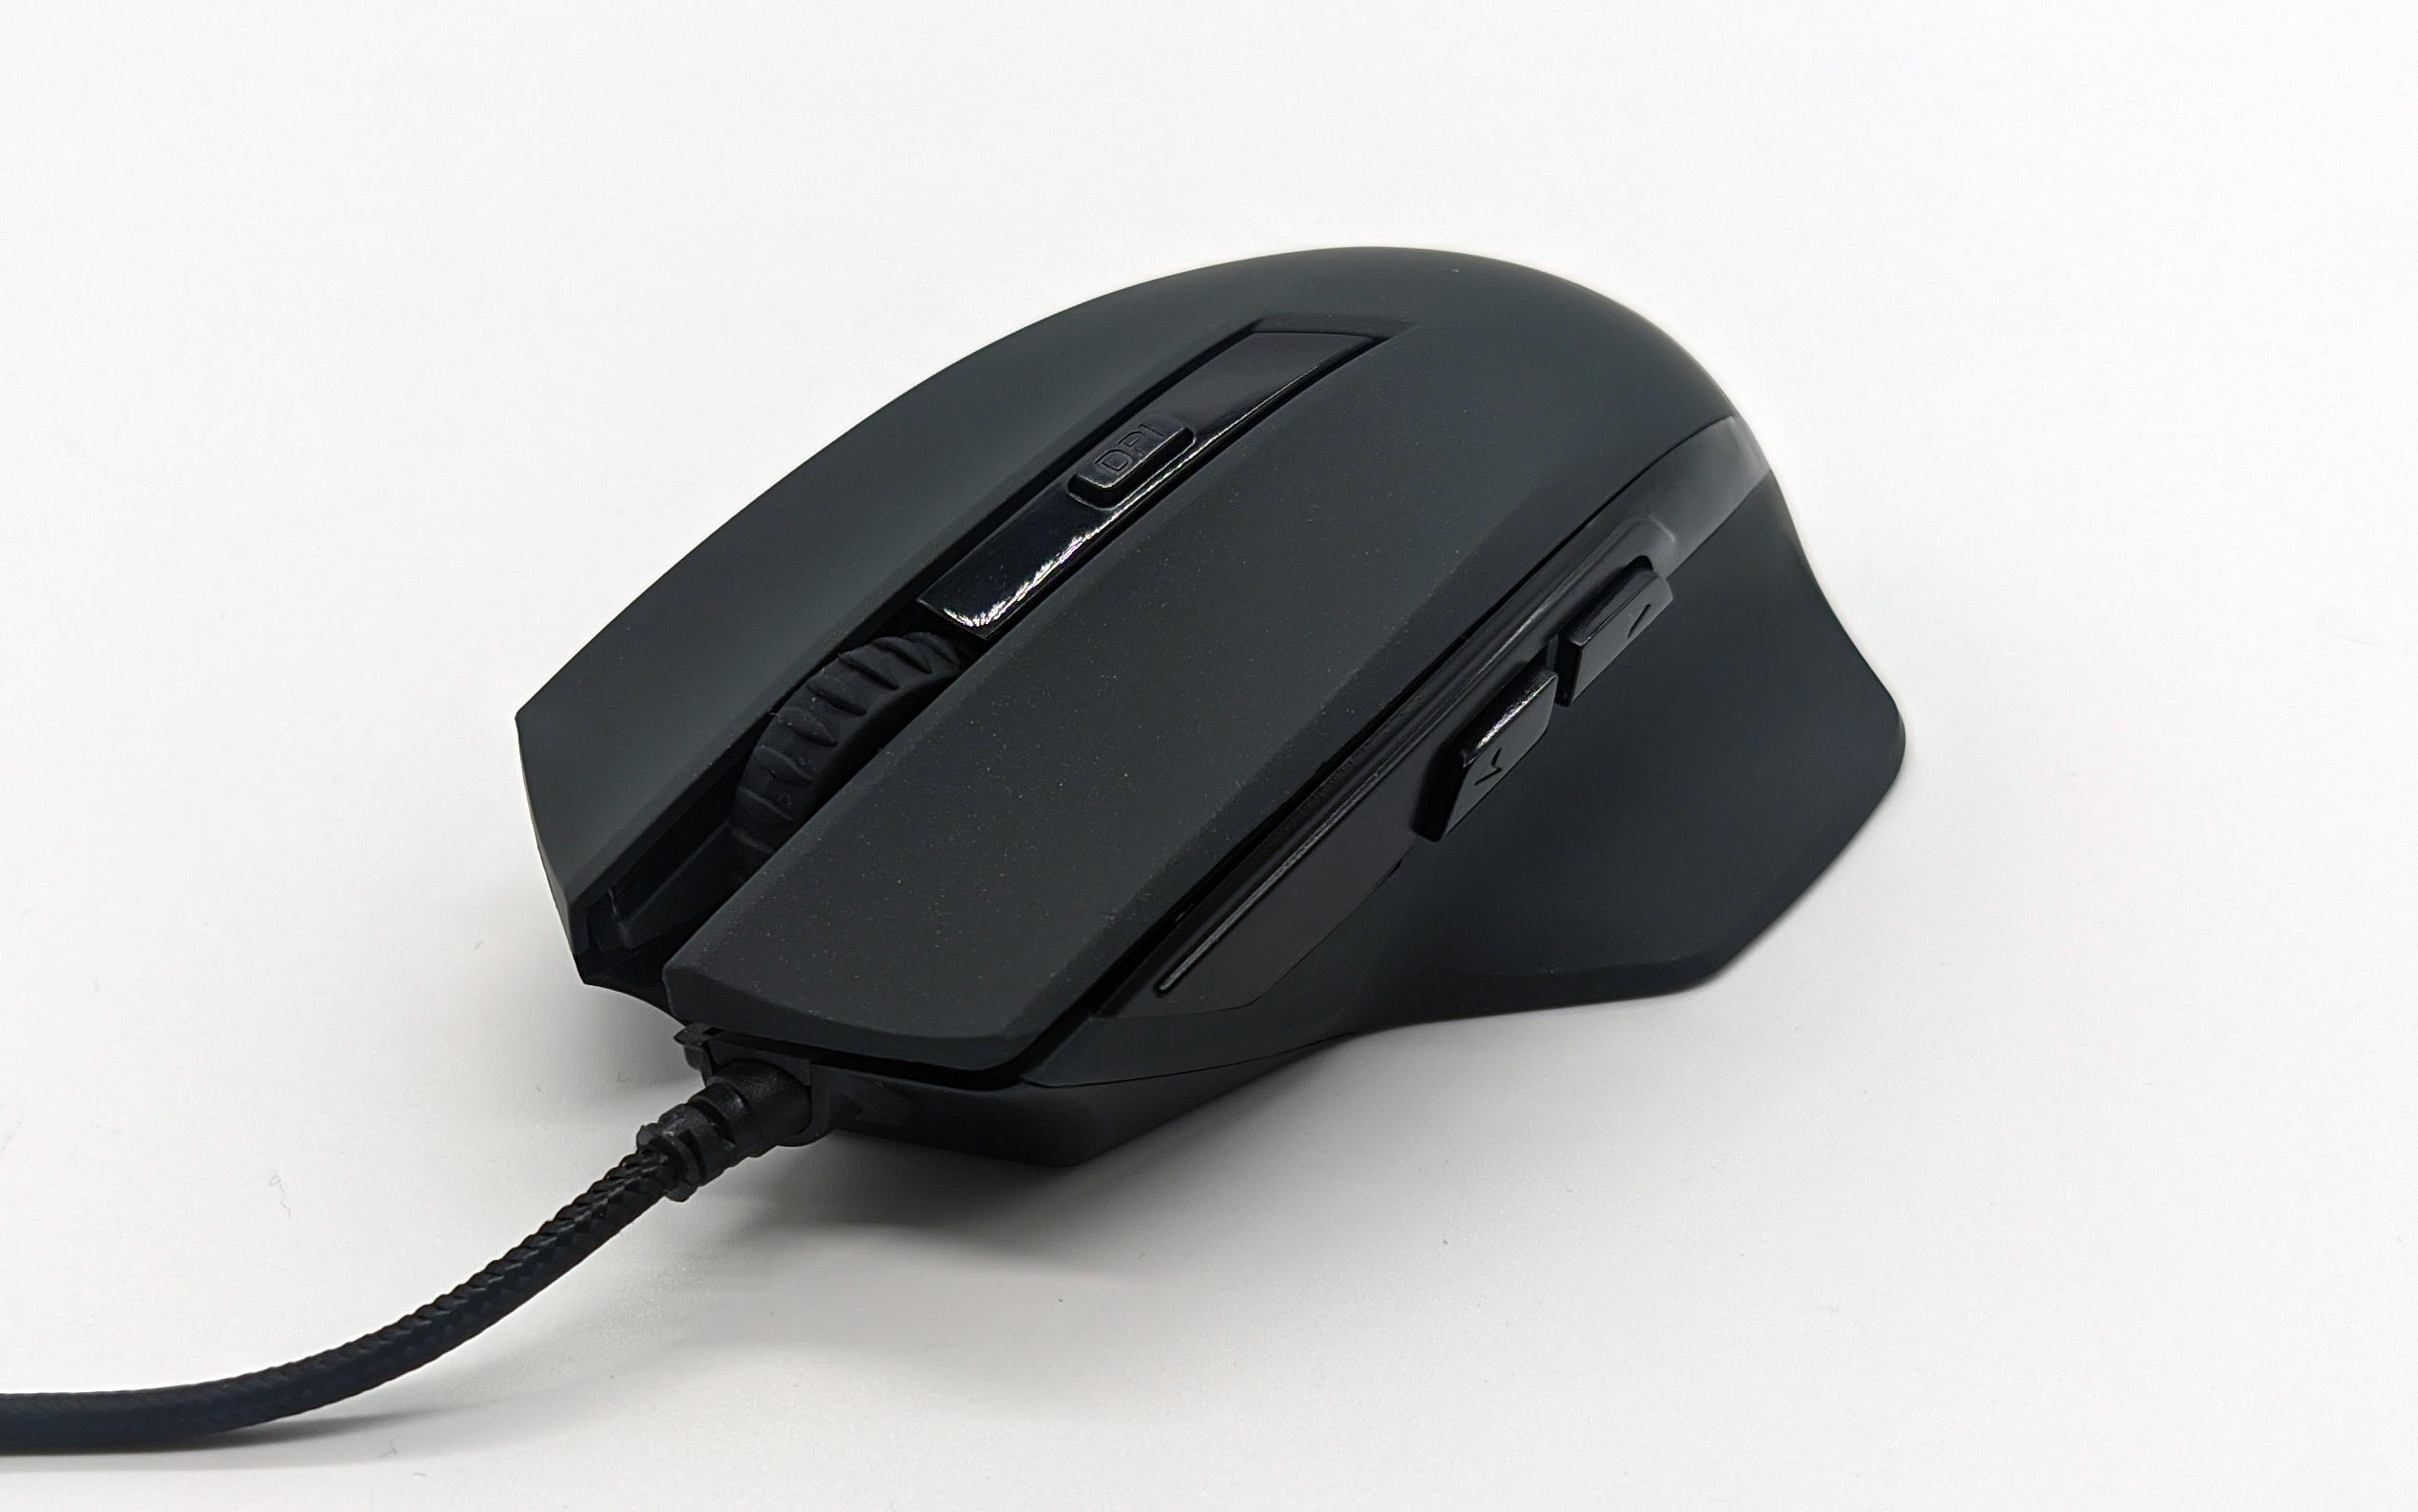 Sharkoon Shark Force II Mouse Review - Cheap 9-Euro-Bargain or just Cheap?  | Price inspector | igor´sLAB